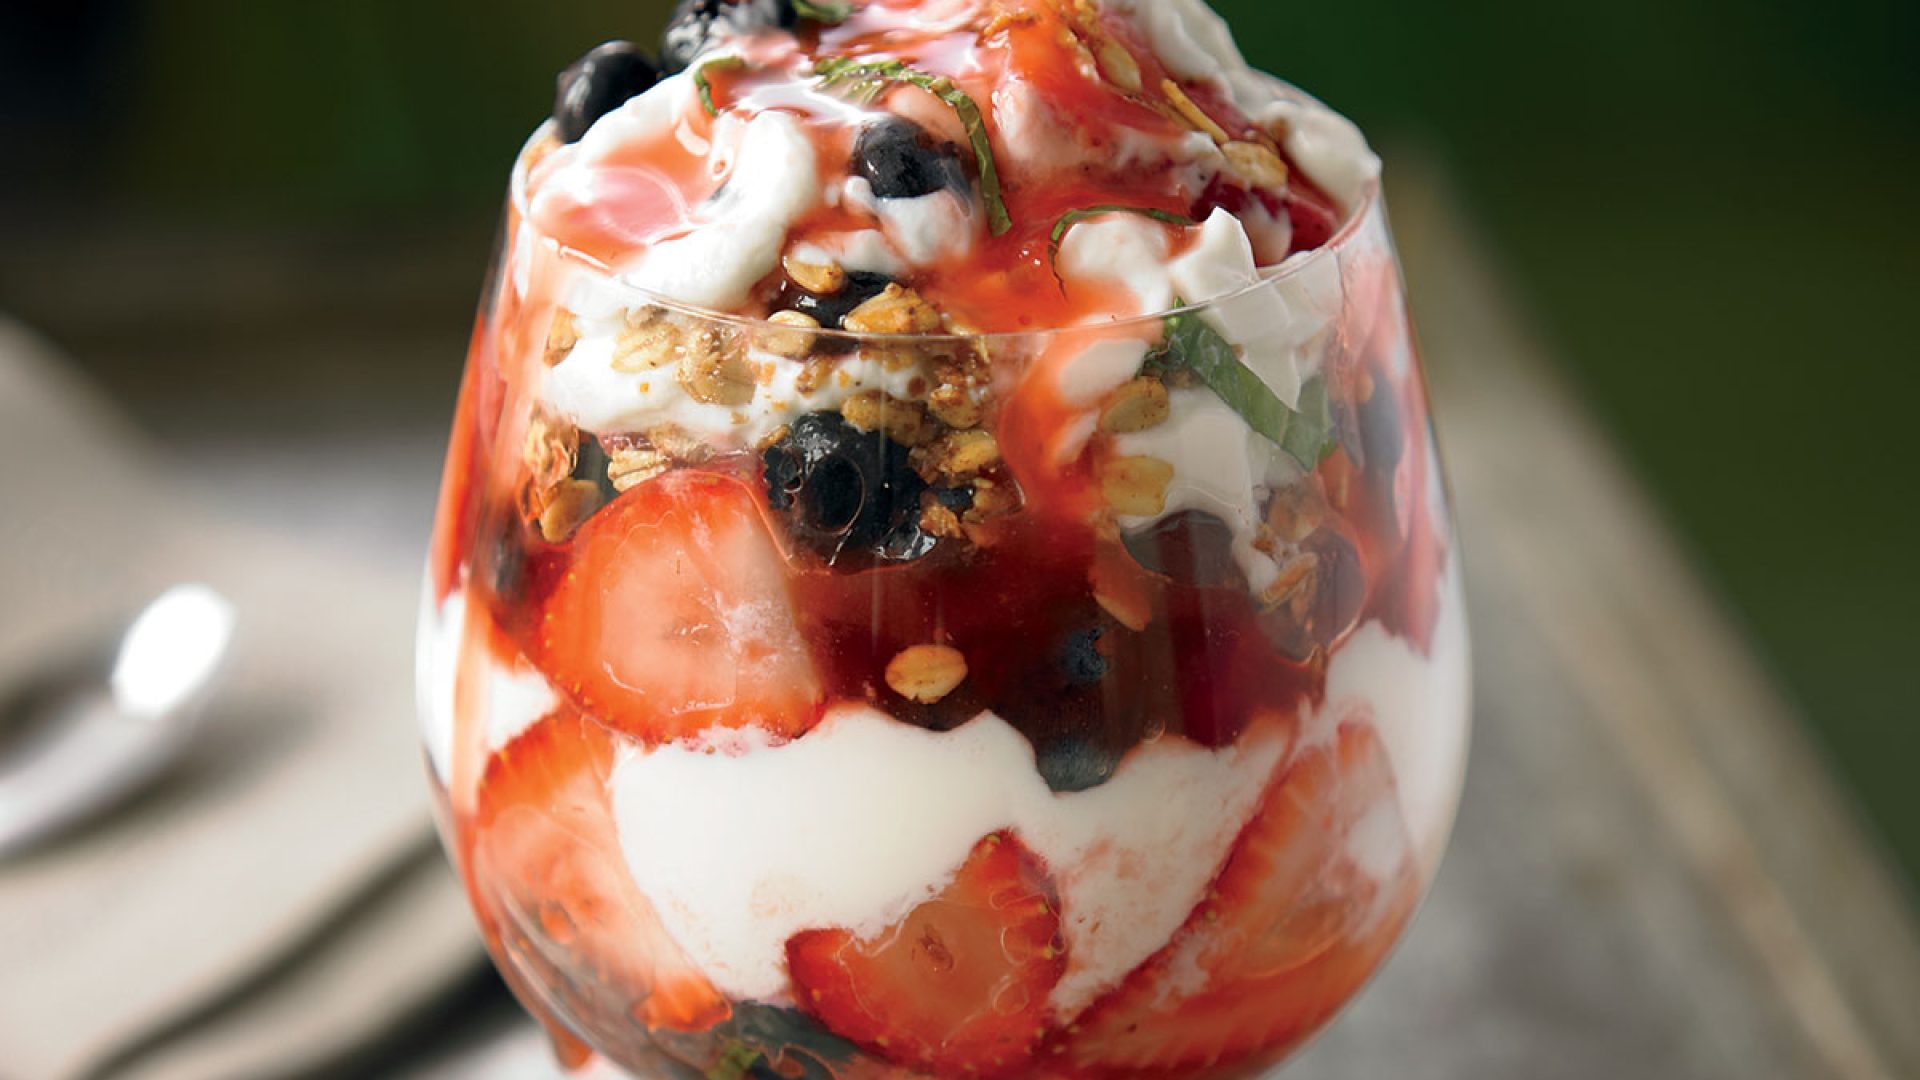 Healthy Yogurt Parfait With Fruit and Granola Recipe - Eat This Not That